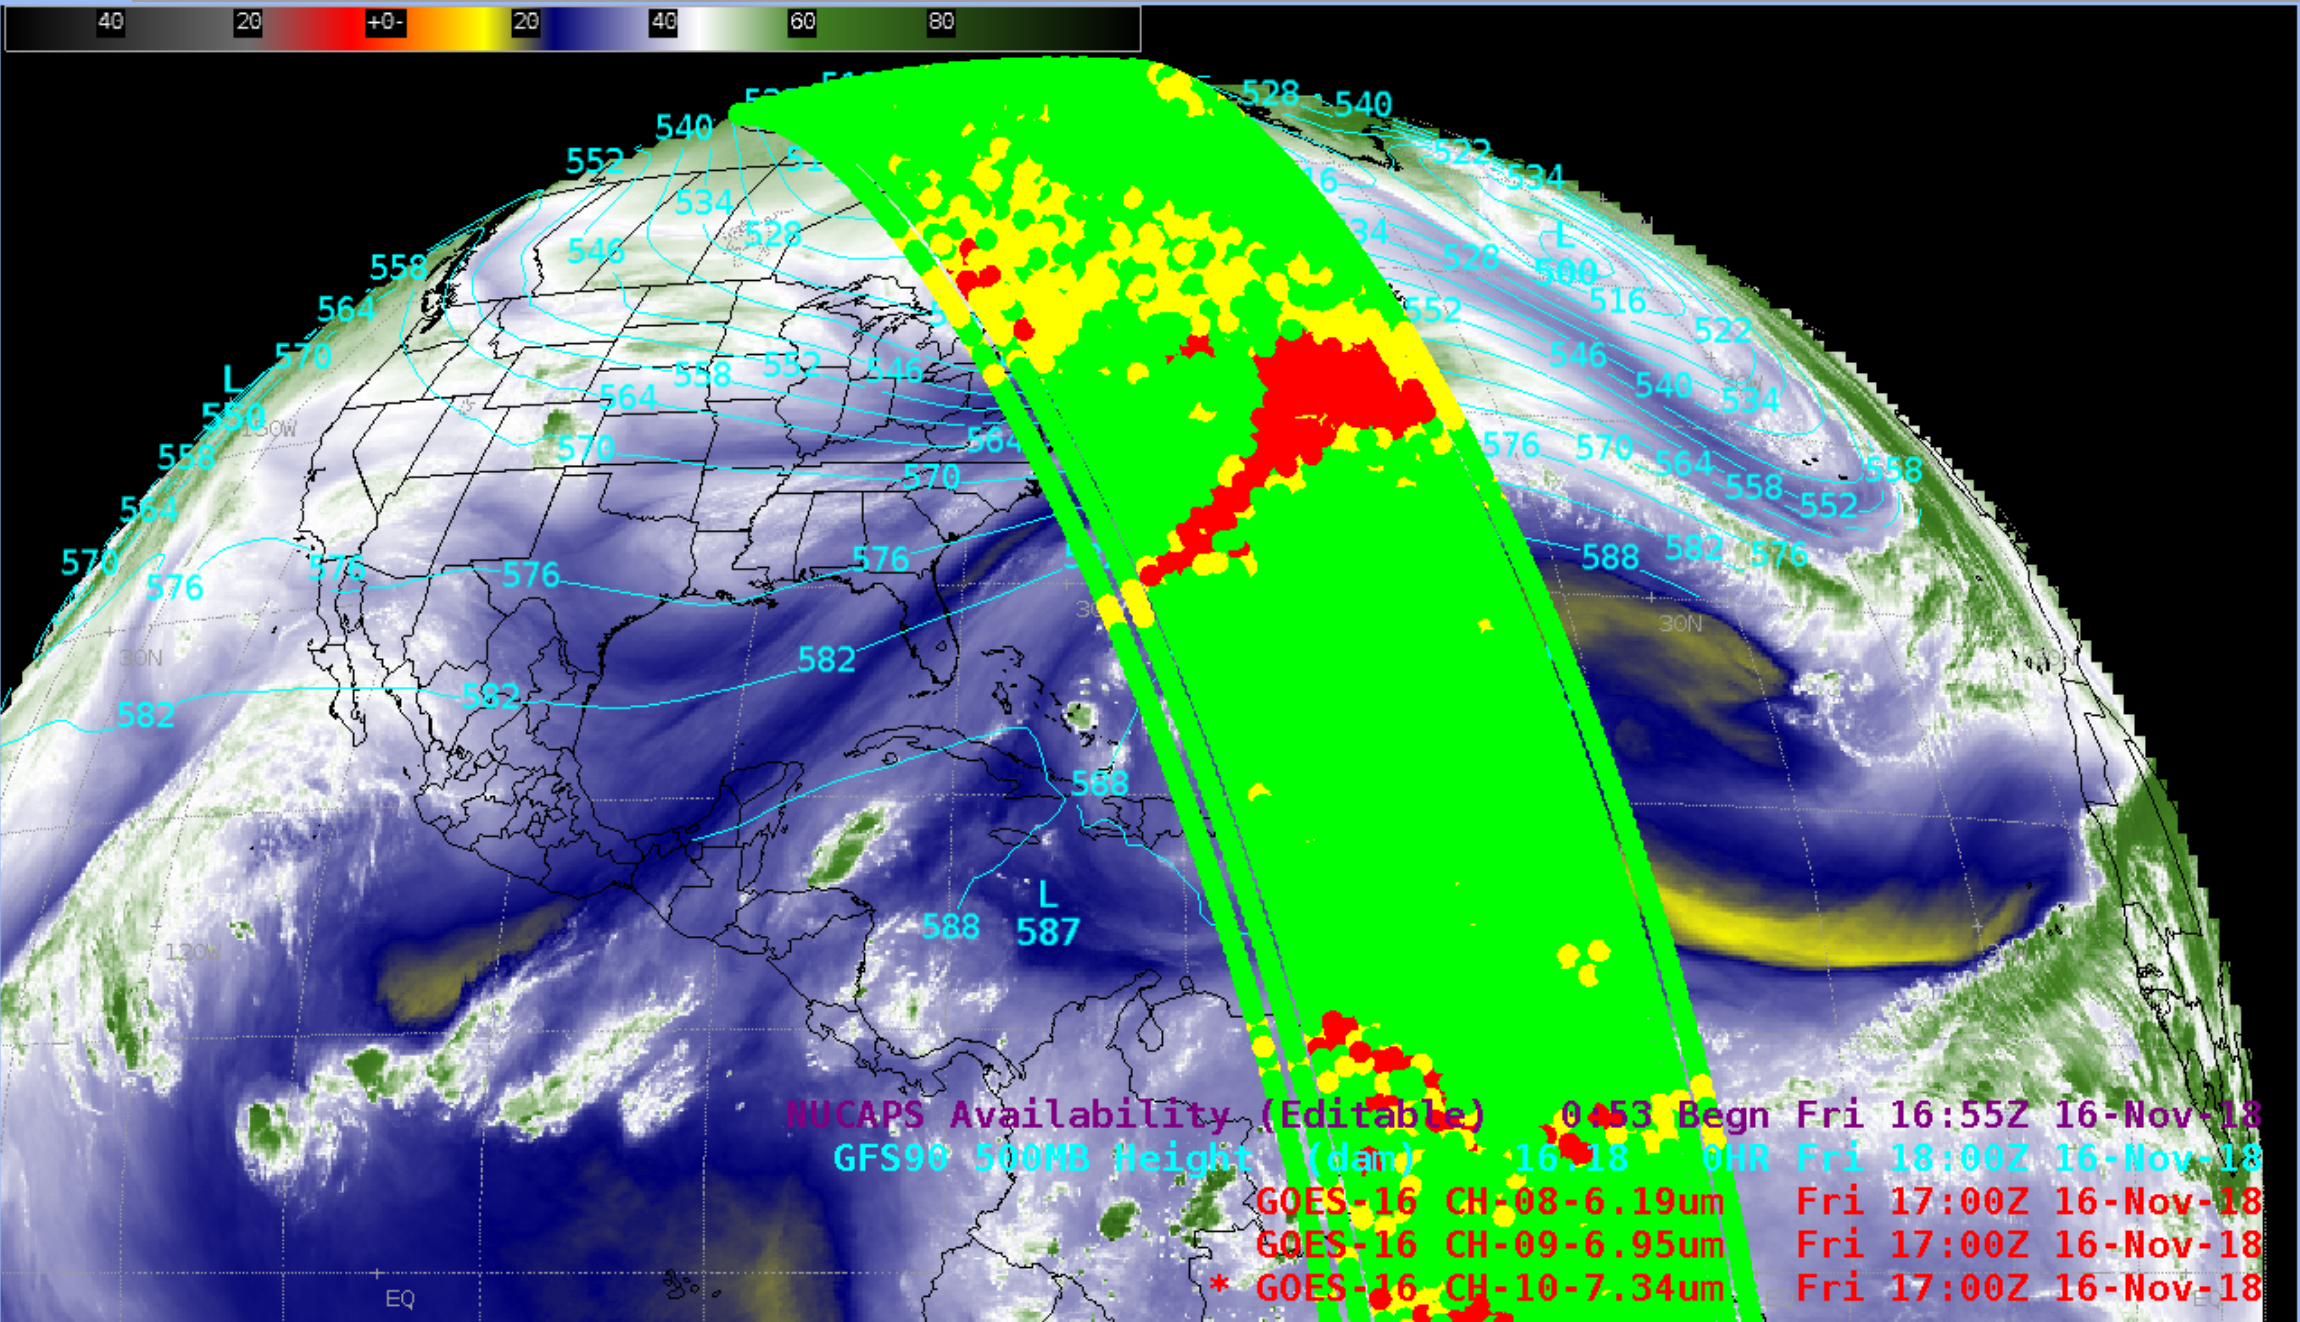 GOES-16 Upper-level (6.2 µm) Water Vapor image at 1700 UTC, with a swath of NUCAPS sounding availability [click to enlarge]